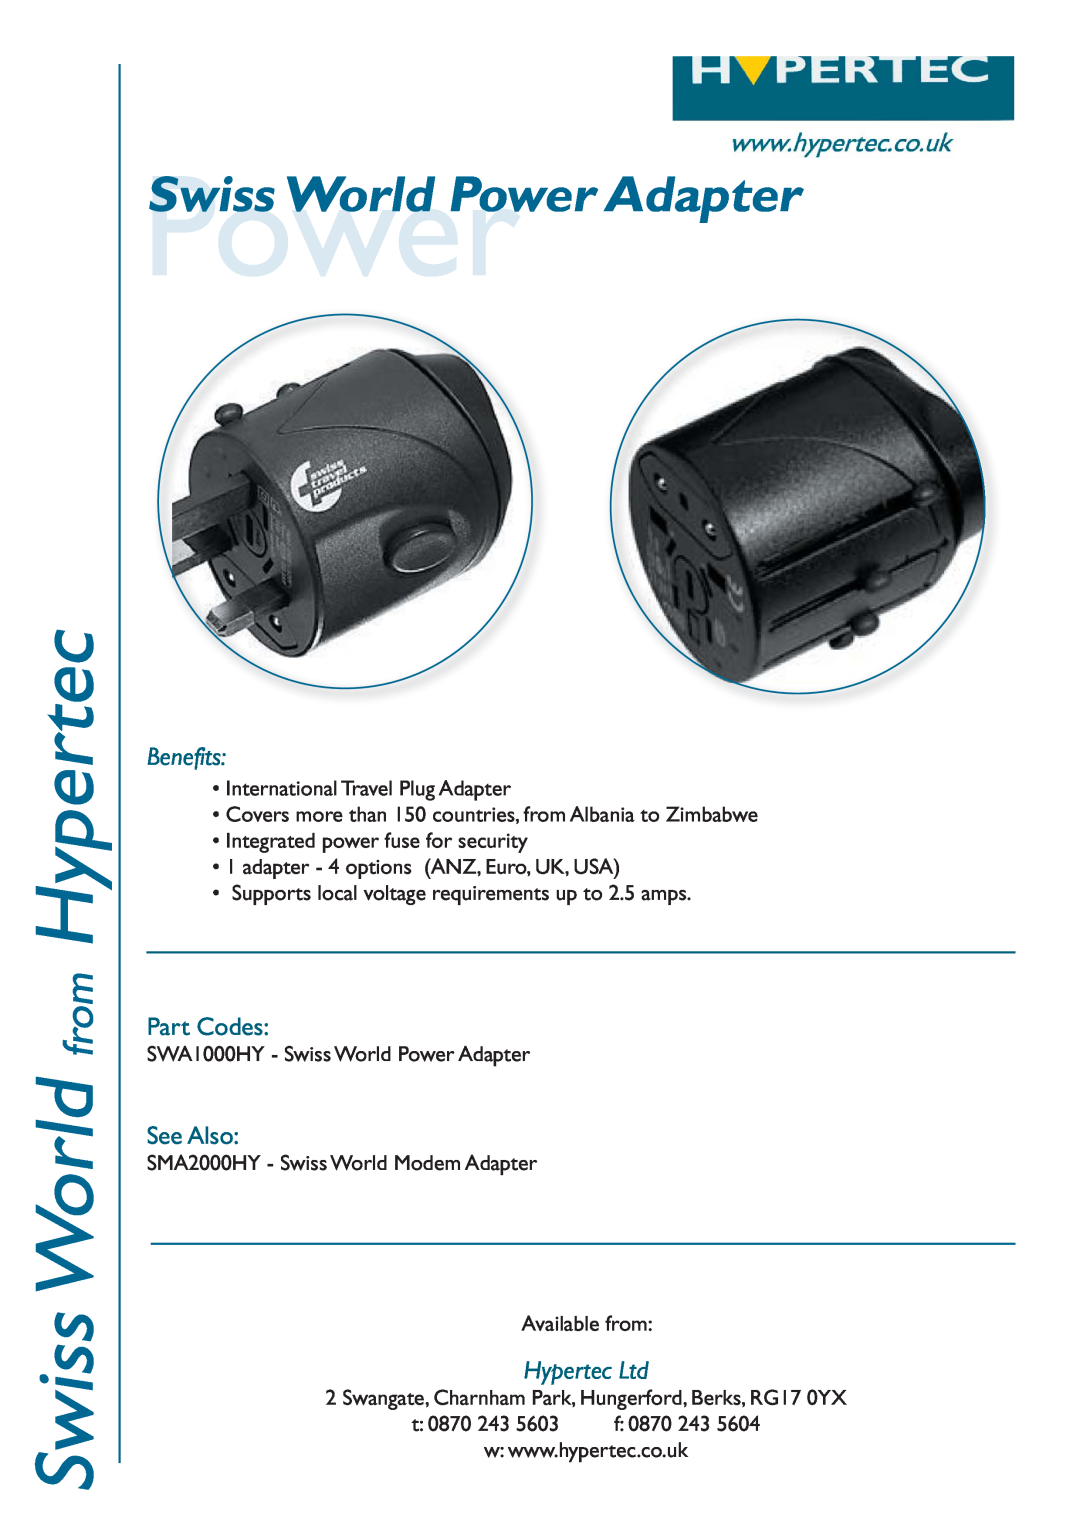 Hypertec SWA1000HY manual Swiss World from Hypertec, PowerSwiss World Power Adapter, Benefits, Part Codes, See Also 